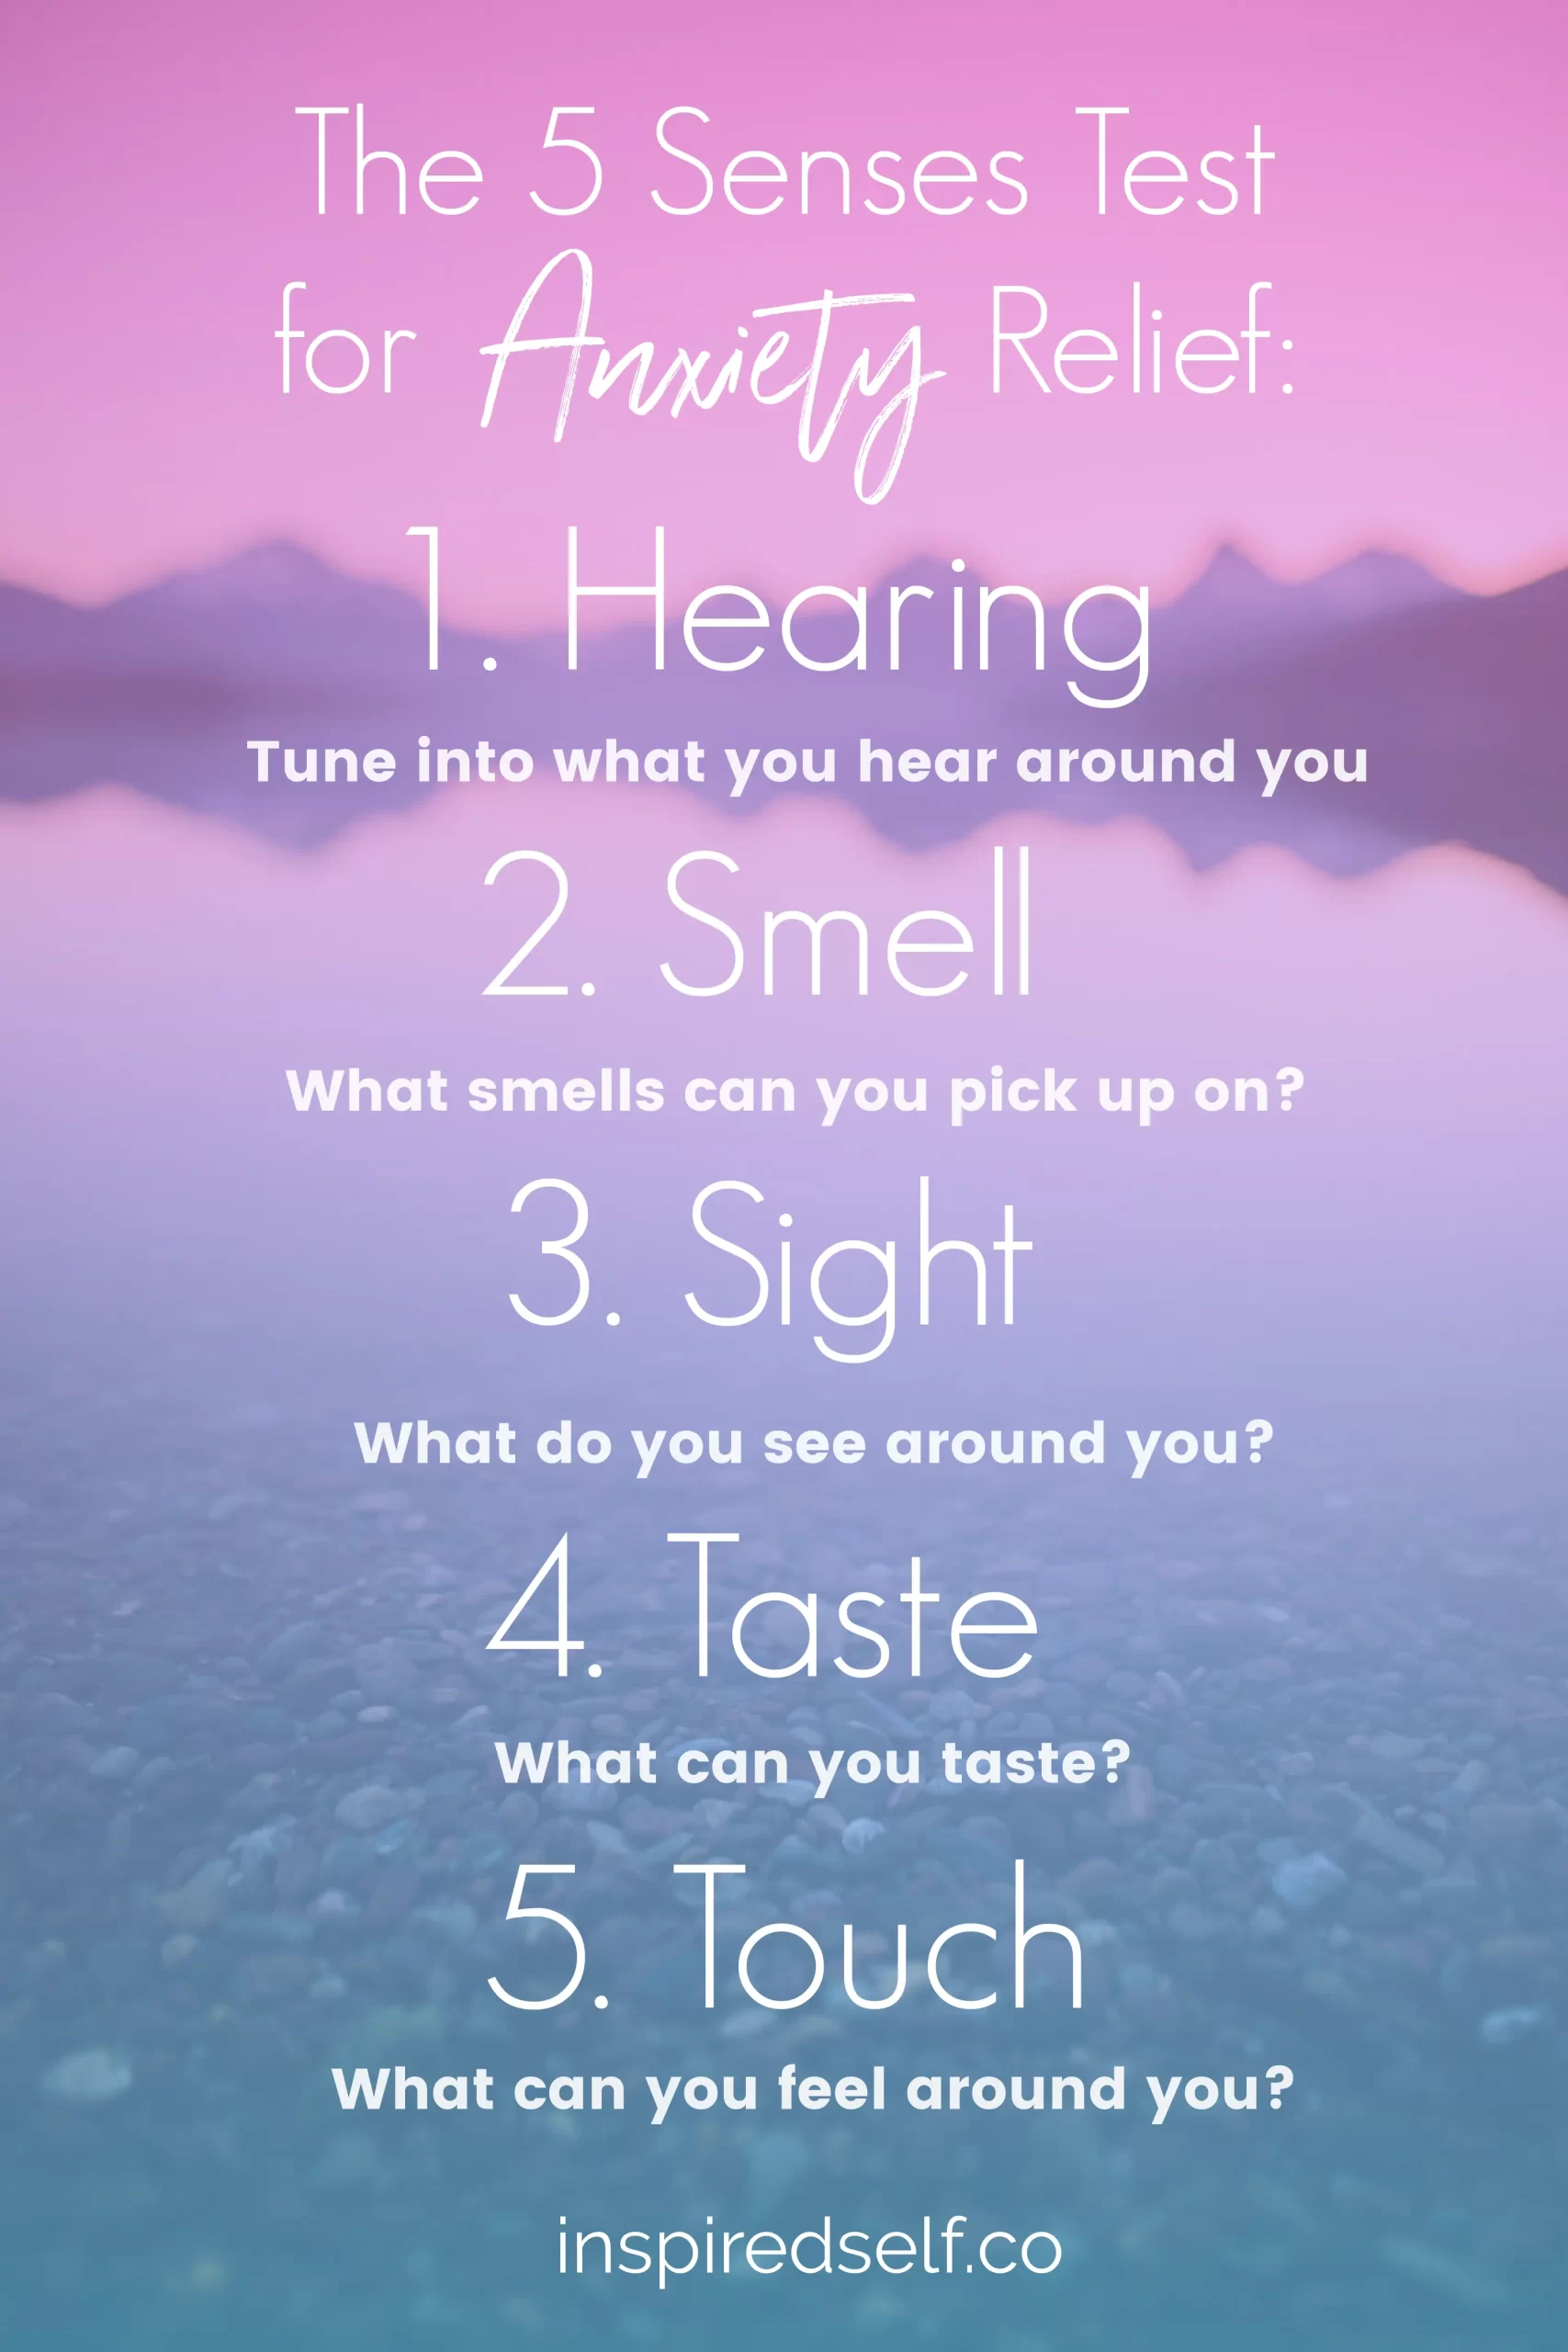 Five senses activity for anxiety